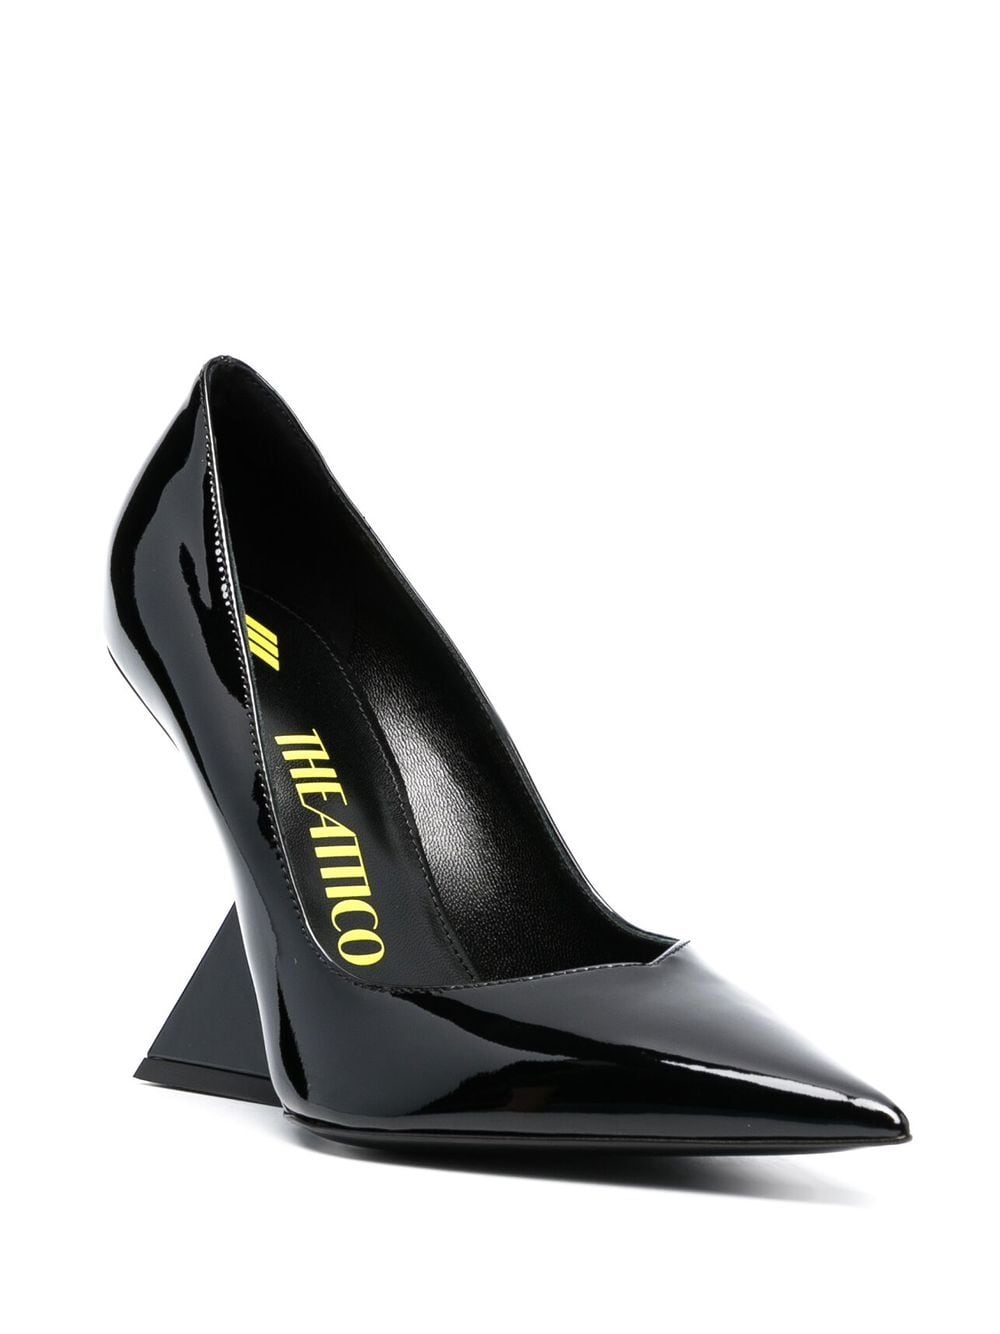 The Attico Cheope Pump in Black available at The New Trend Australia